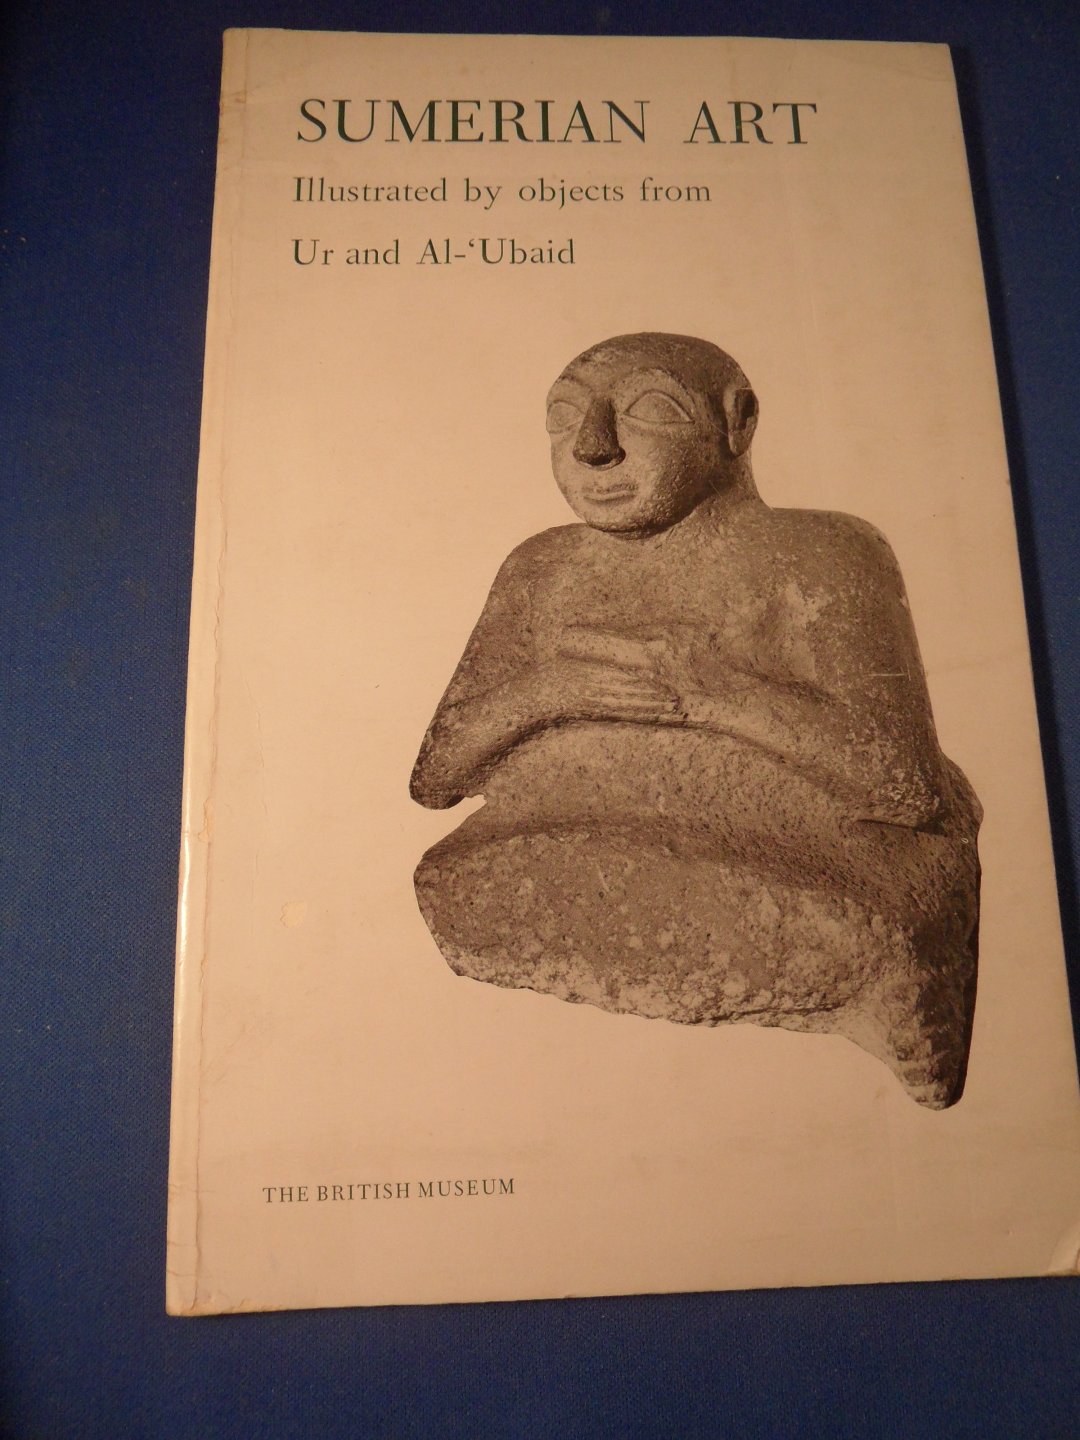  - Sumerian Art. Illustrated by objects from Ur and Al-'Ubaid